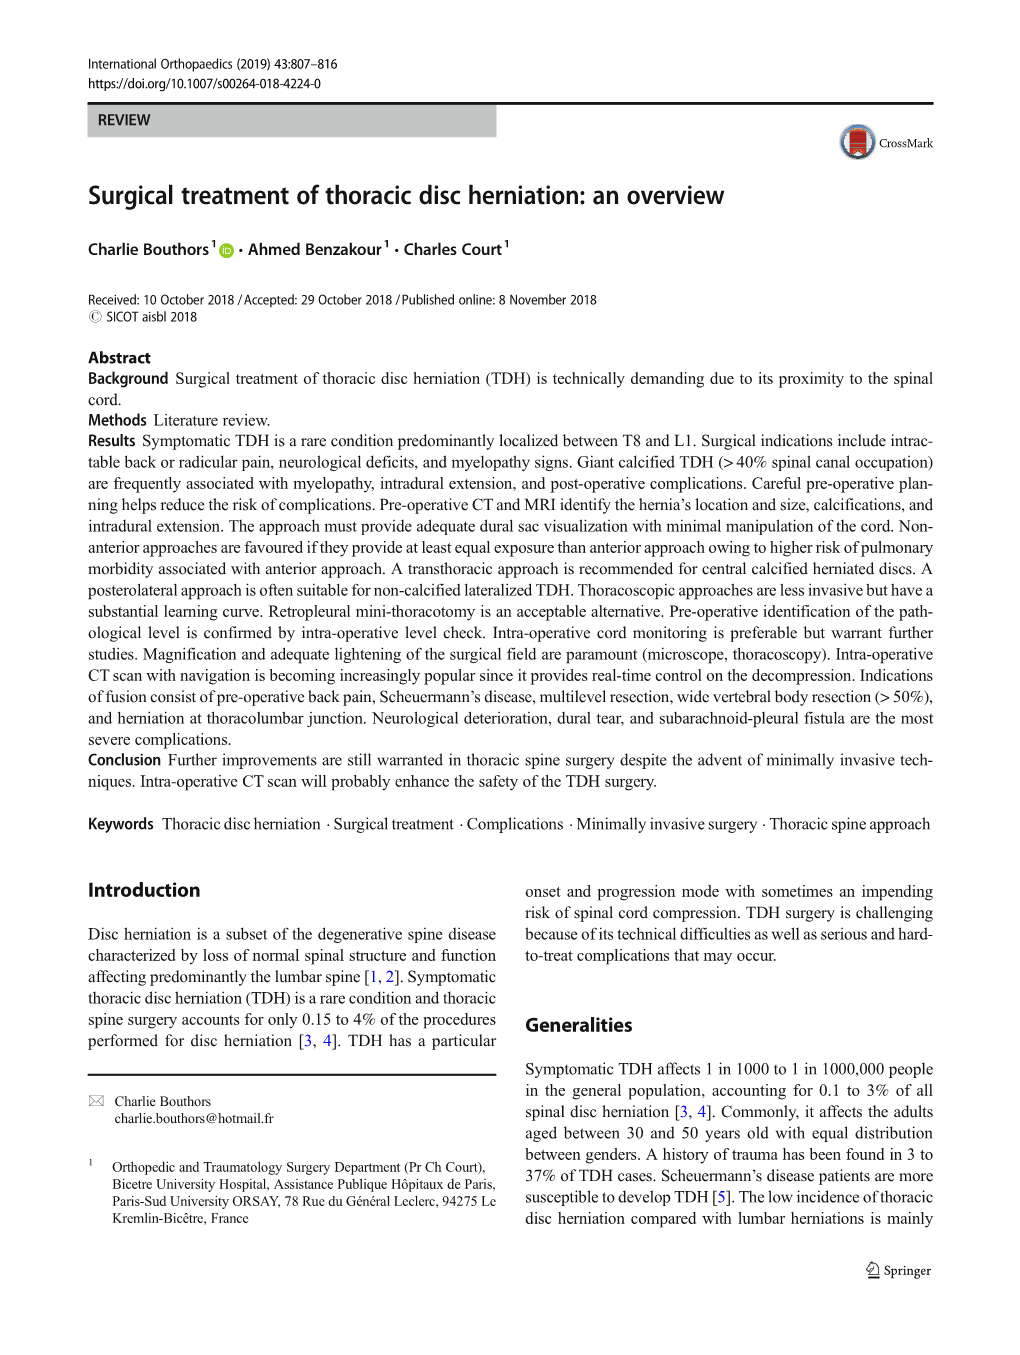 Surgical Treatment of Thoracic Disc Herniation: an Overview